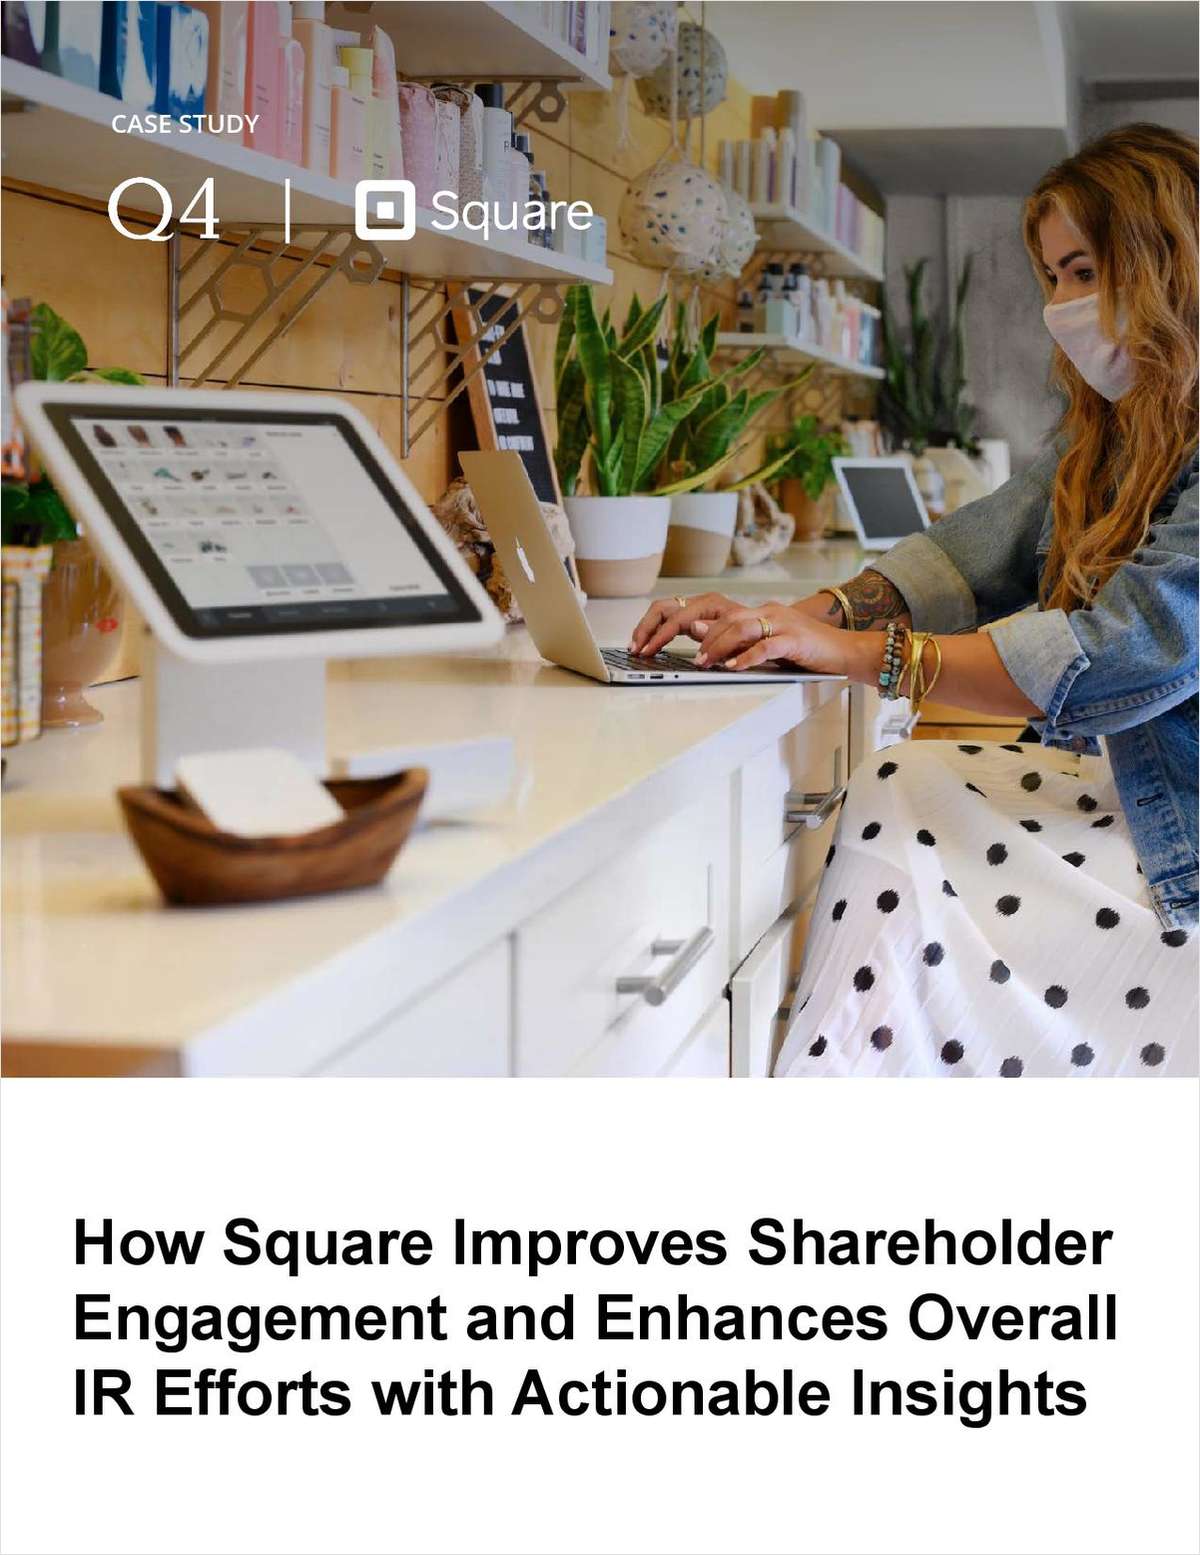 How Square Improves Shareholder Engagement and Enhances Overall IR Efforts with Actionable Insights